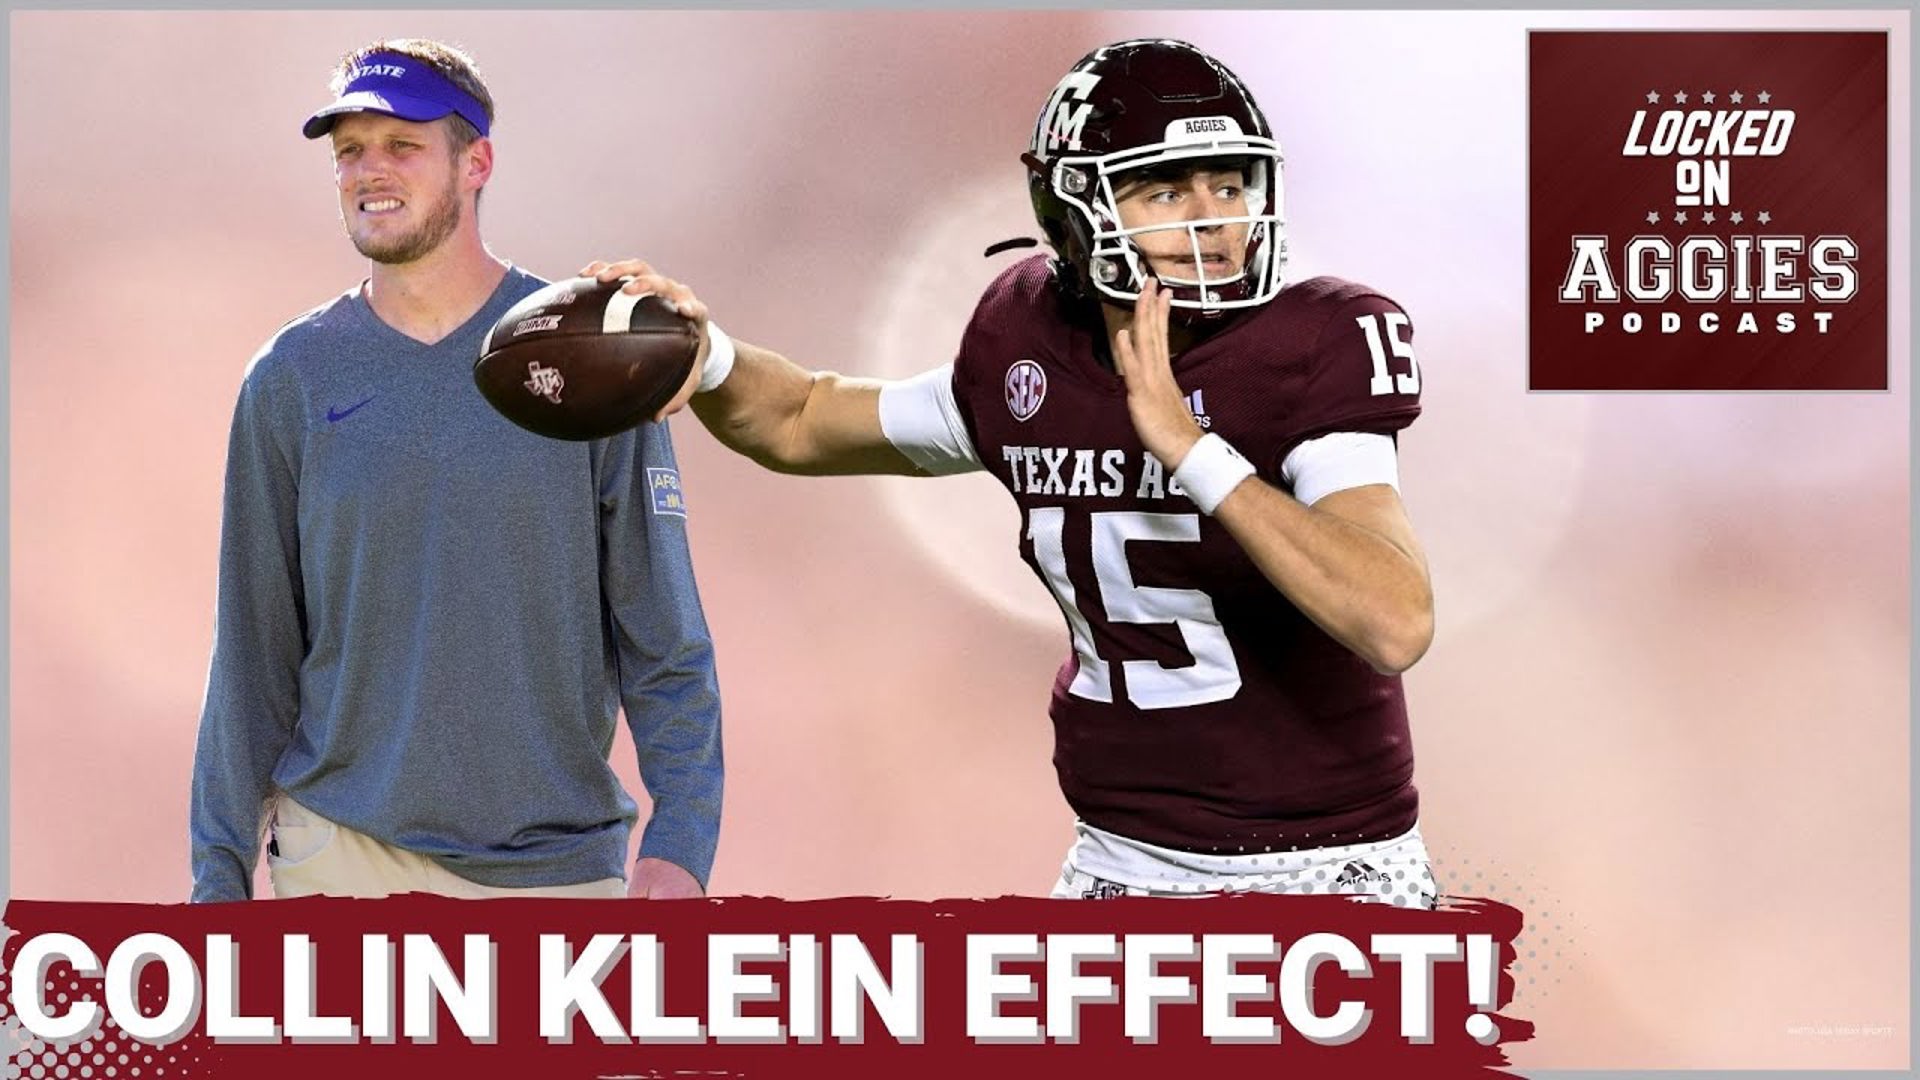 On today's episode of Locked On Aggies, host Andrew Stefaniak talks about how the Texas A&M Aggies offense will be a lot better with Collin Klein.